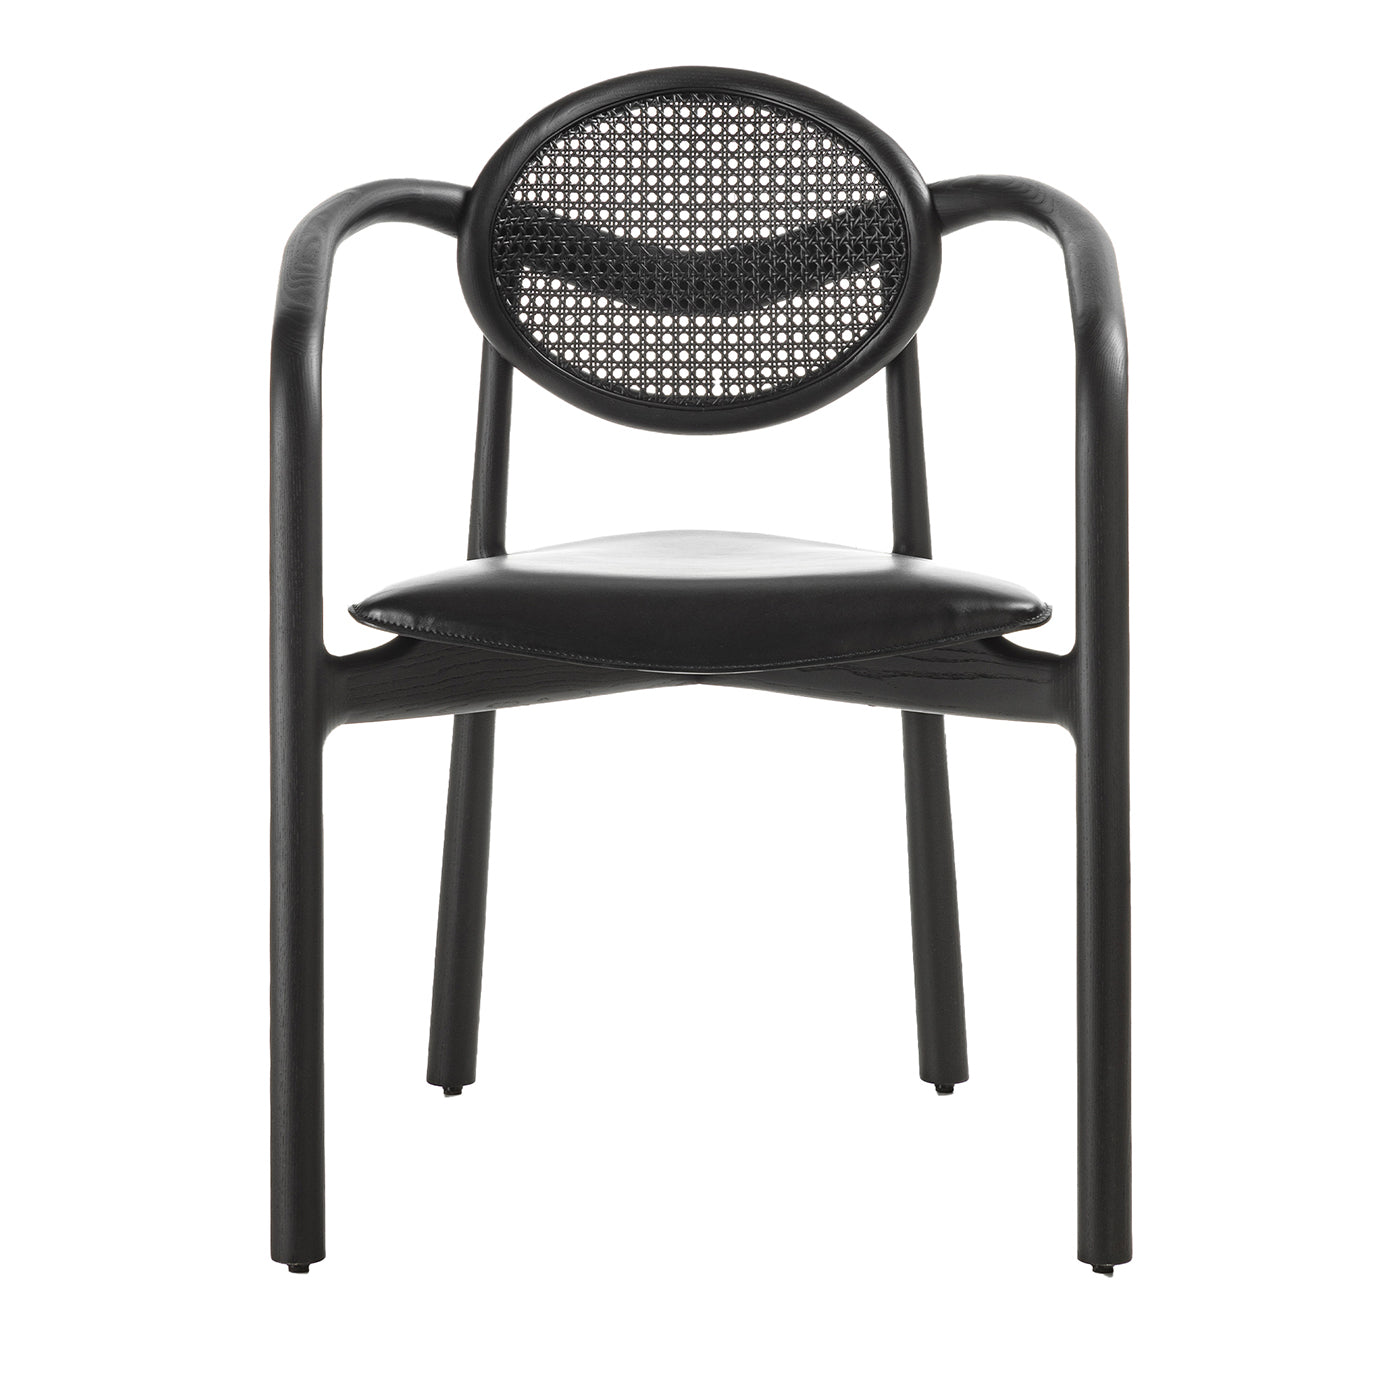 Marlena Black Chair With Arms by Studio Nove.3 - Main view